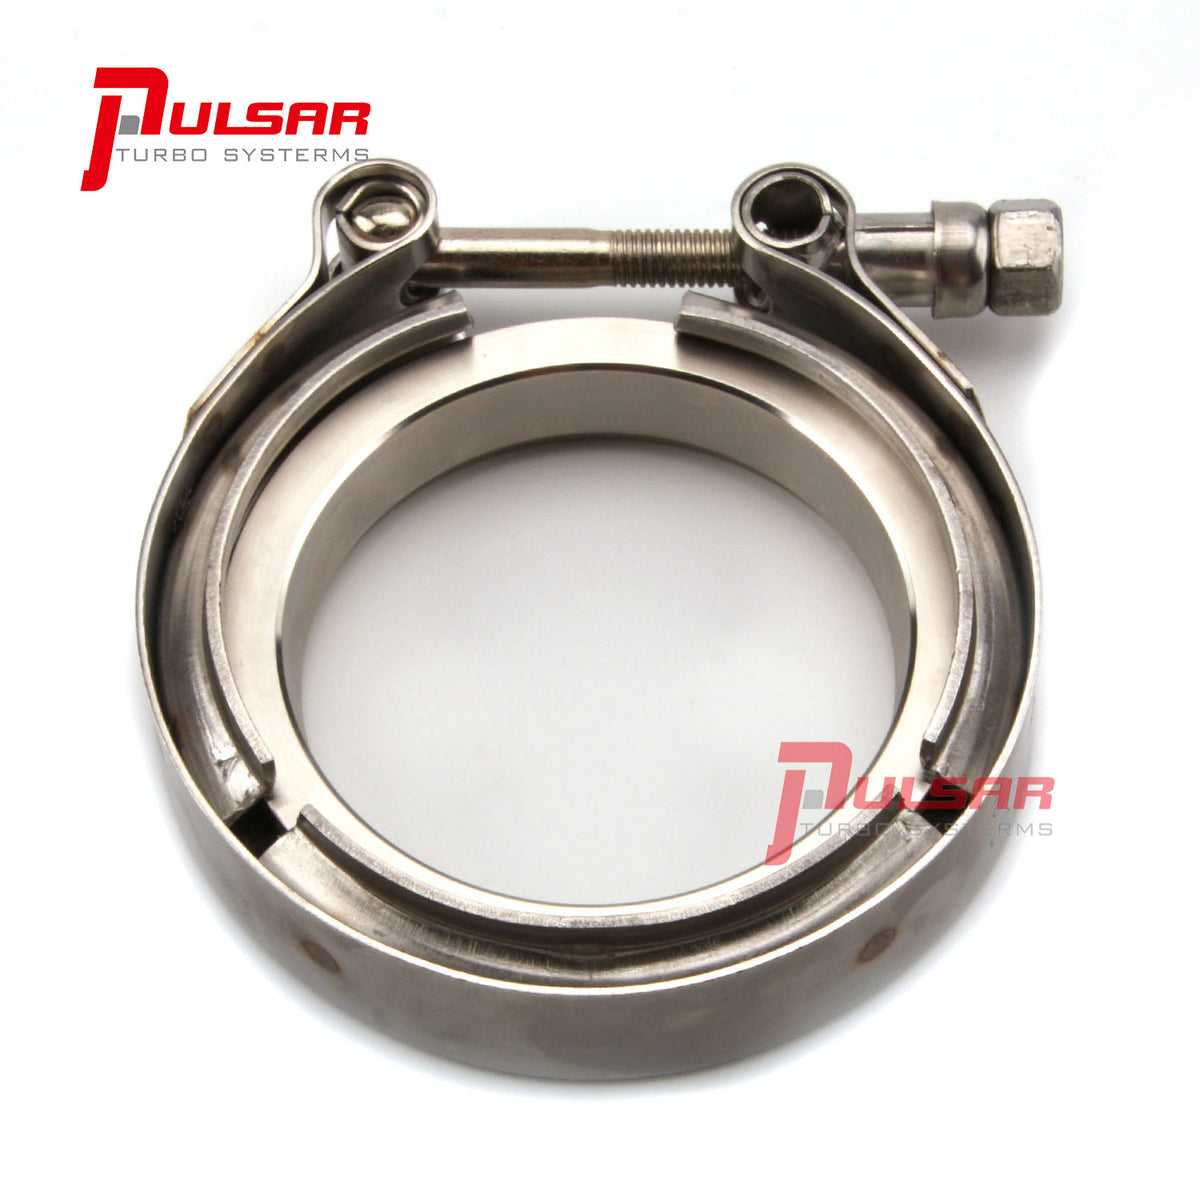 Pulsar Turbo Systems 3” Stainless Steel V-Band Flange & Clamp Kit for Precision Turbo T4 PTE Garrett T67 T72 T76 164376101